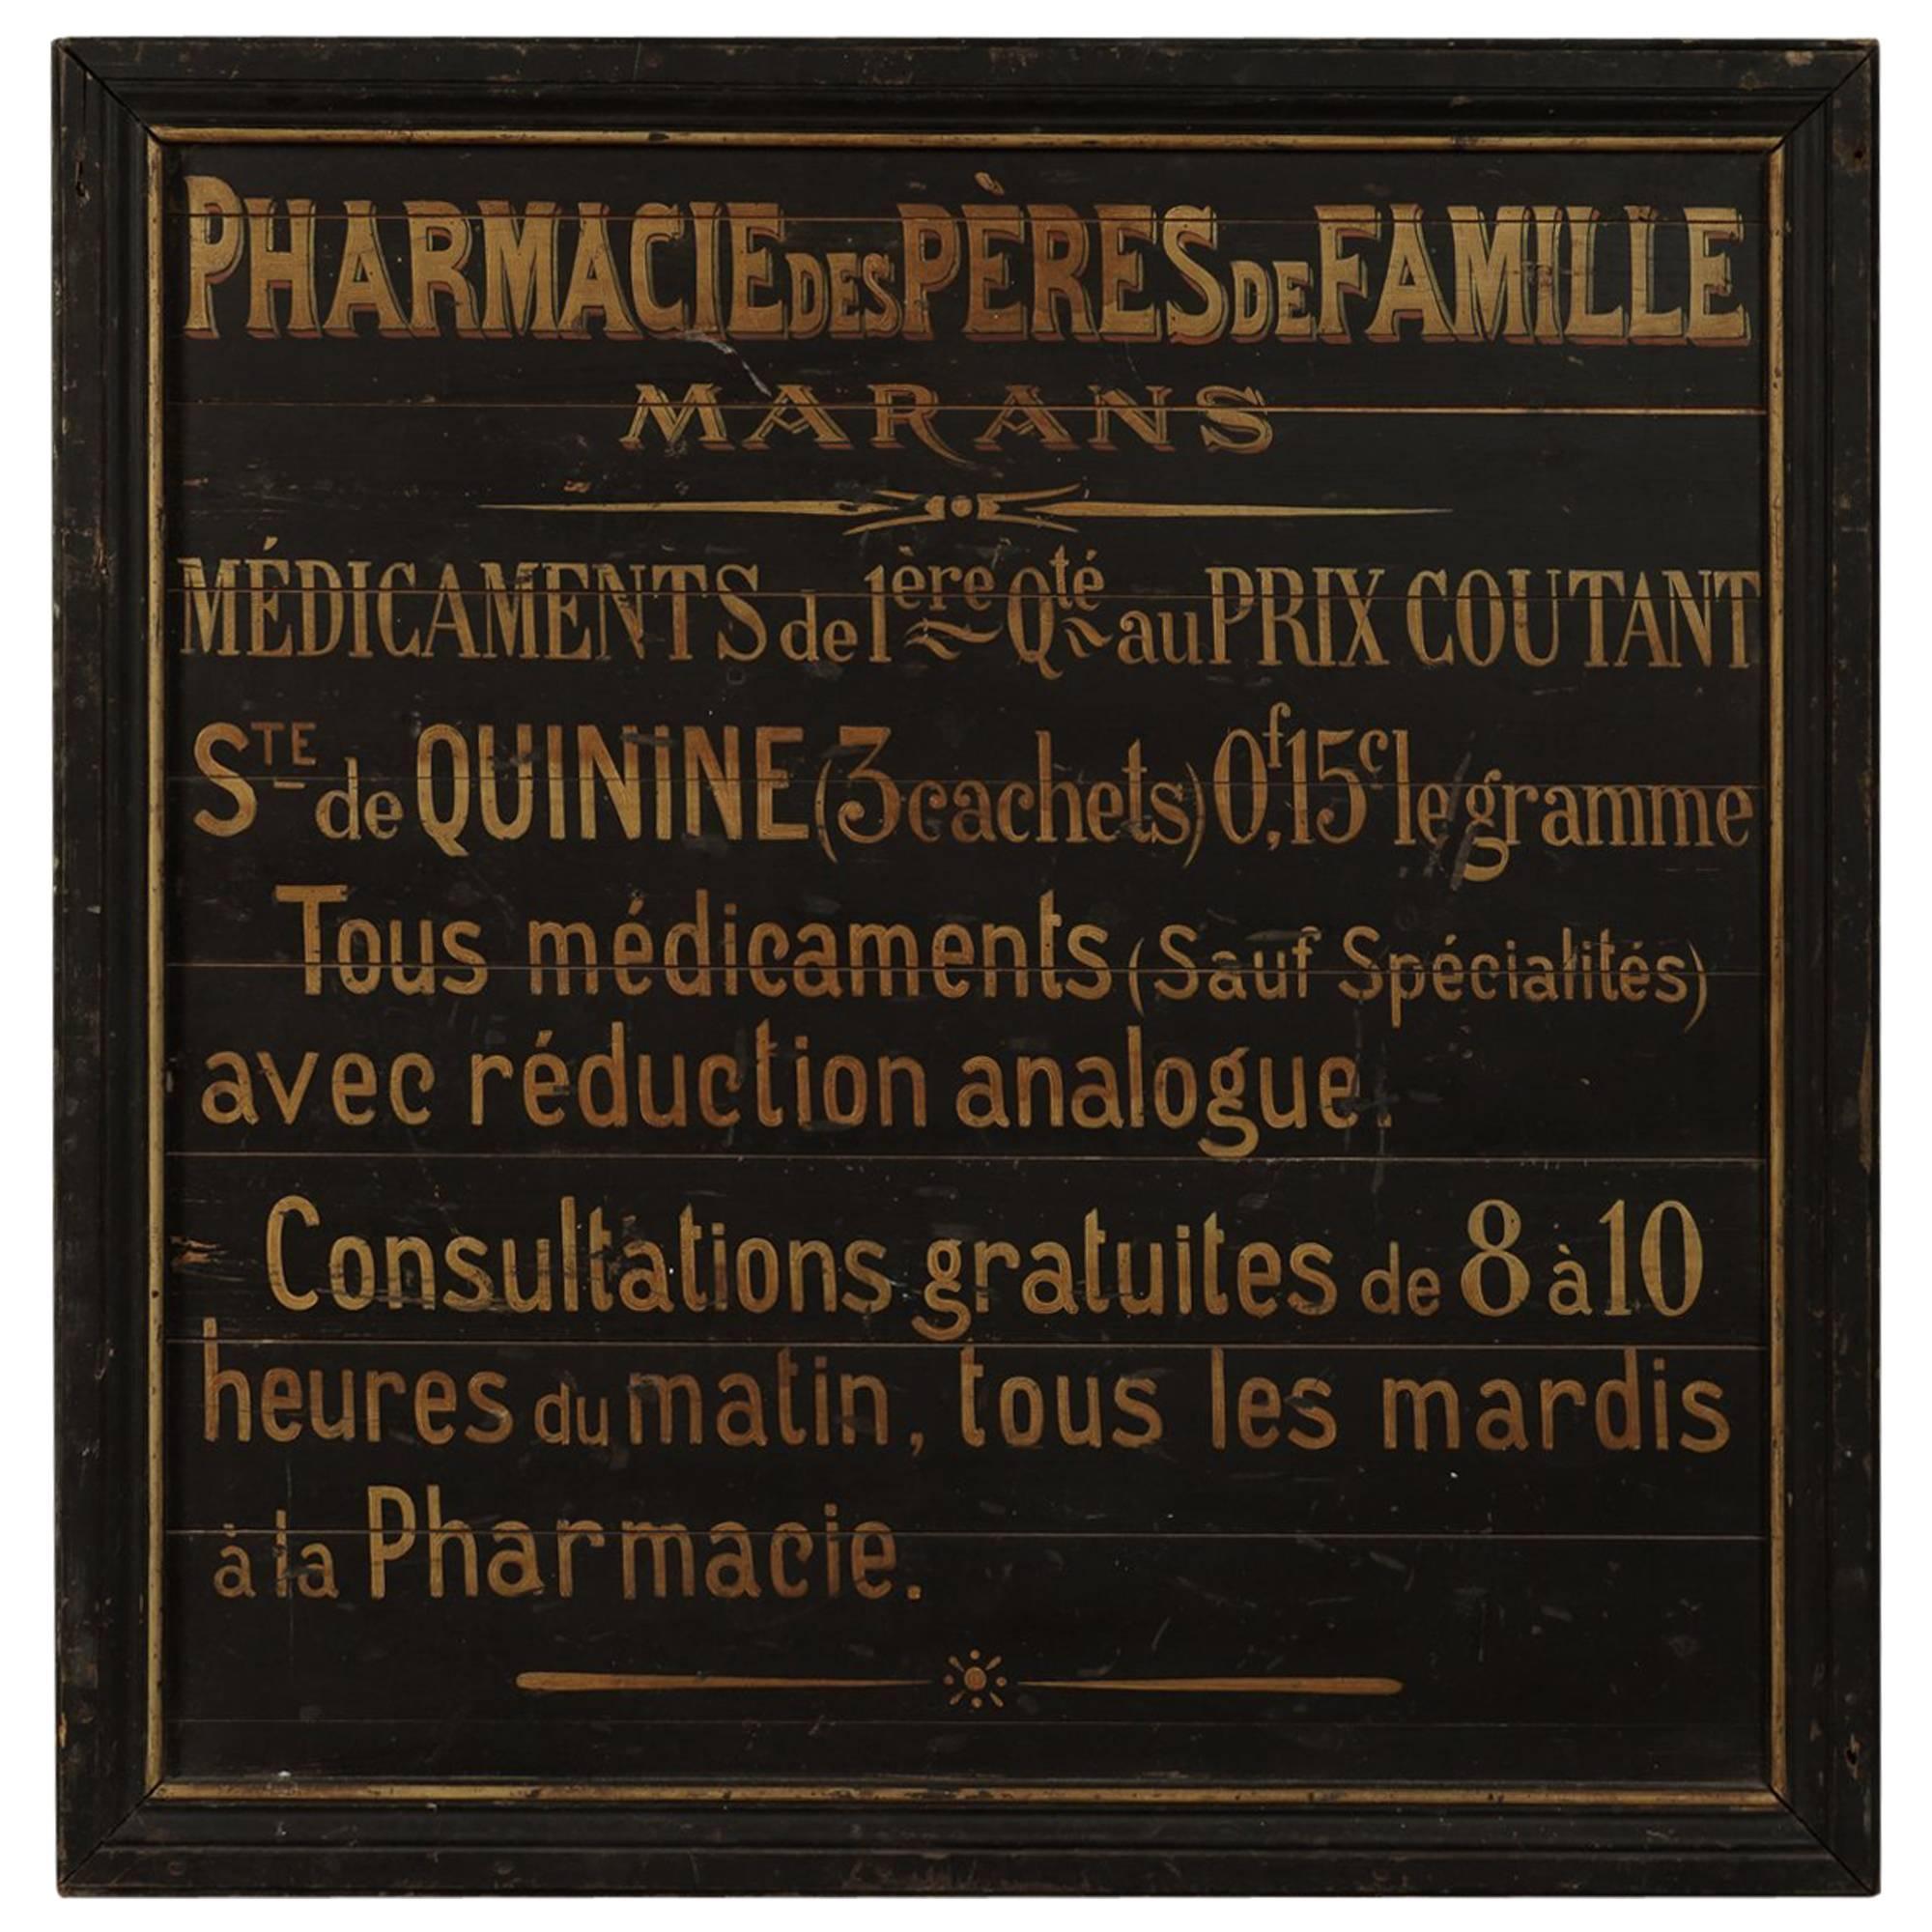 Shop Sign from a Pharmacy, France, circa 1940